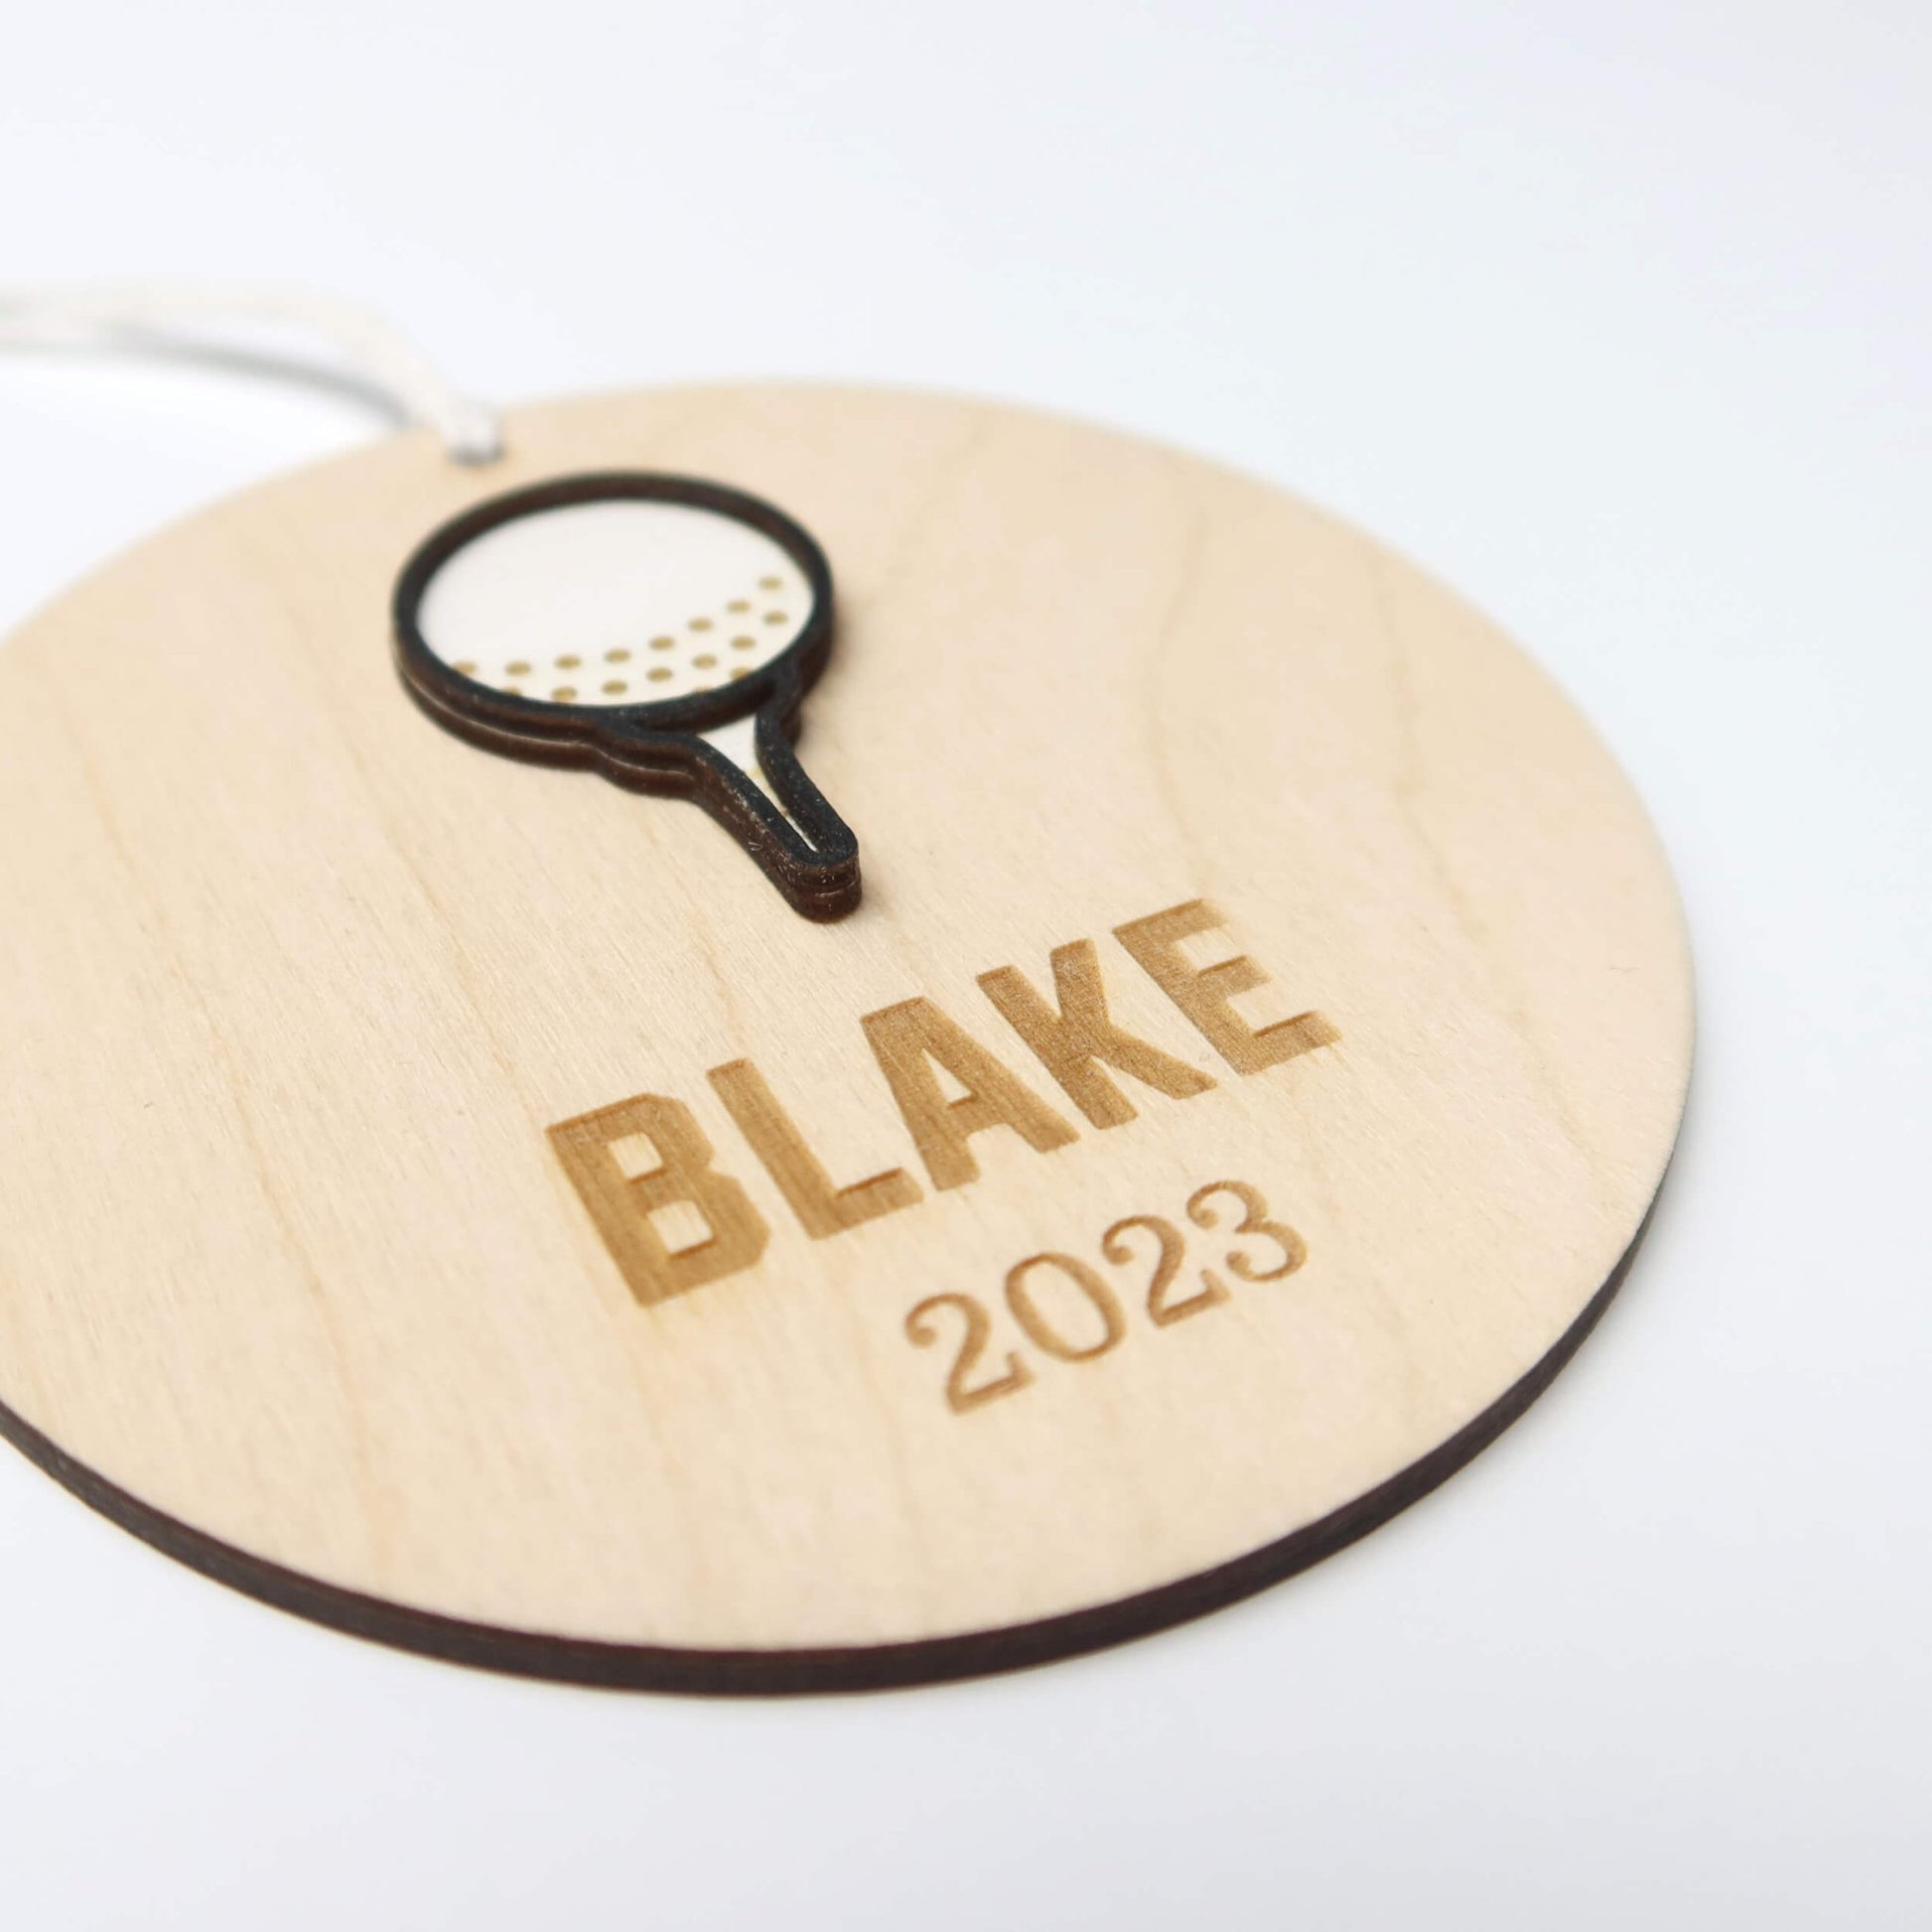 Personalized Golf Ornament - Holiday Ornaments - Moon Rock Prints